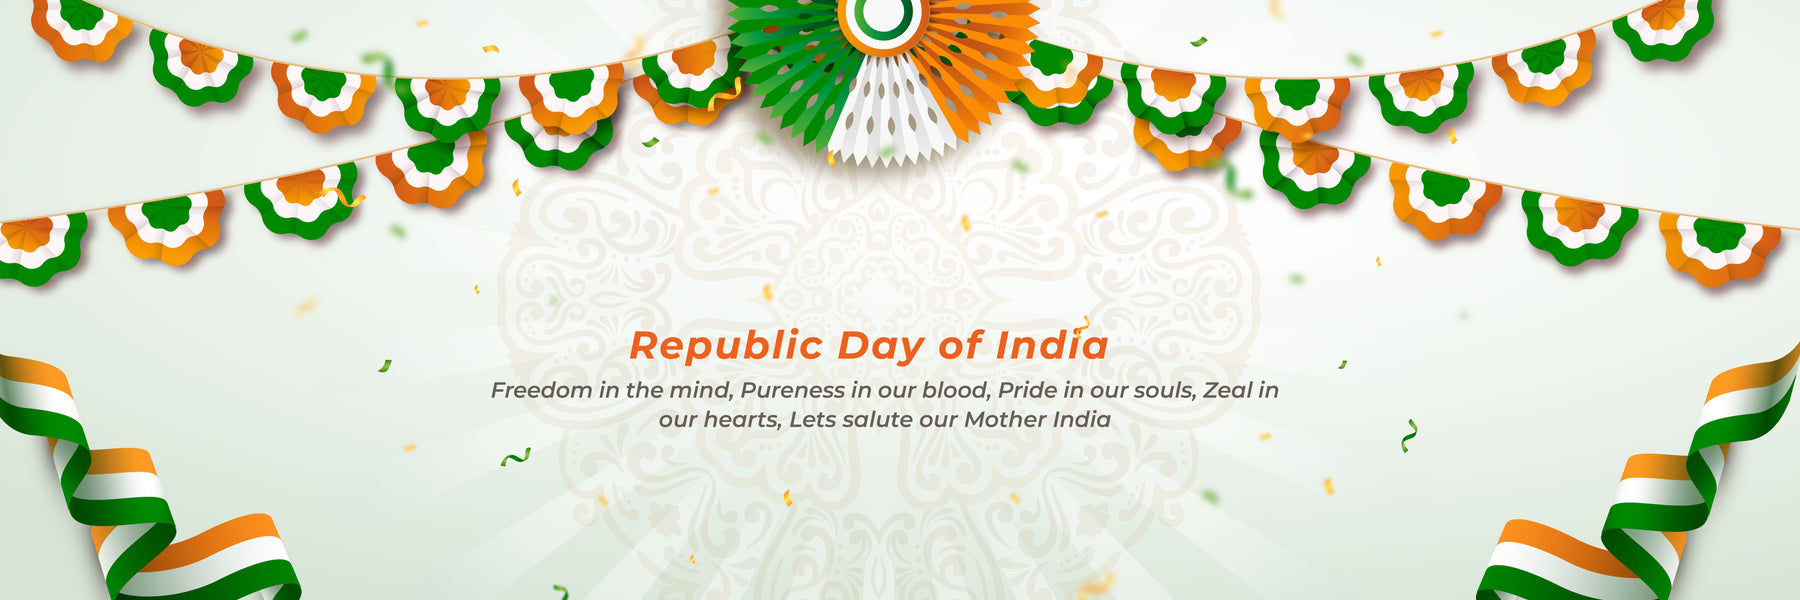 Freedom in the mind, Pureness in our blood, Pride in our souls, Zeal in our hearts, Lets salute our Mother India FromIndia.com